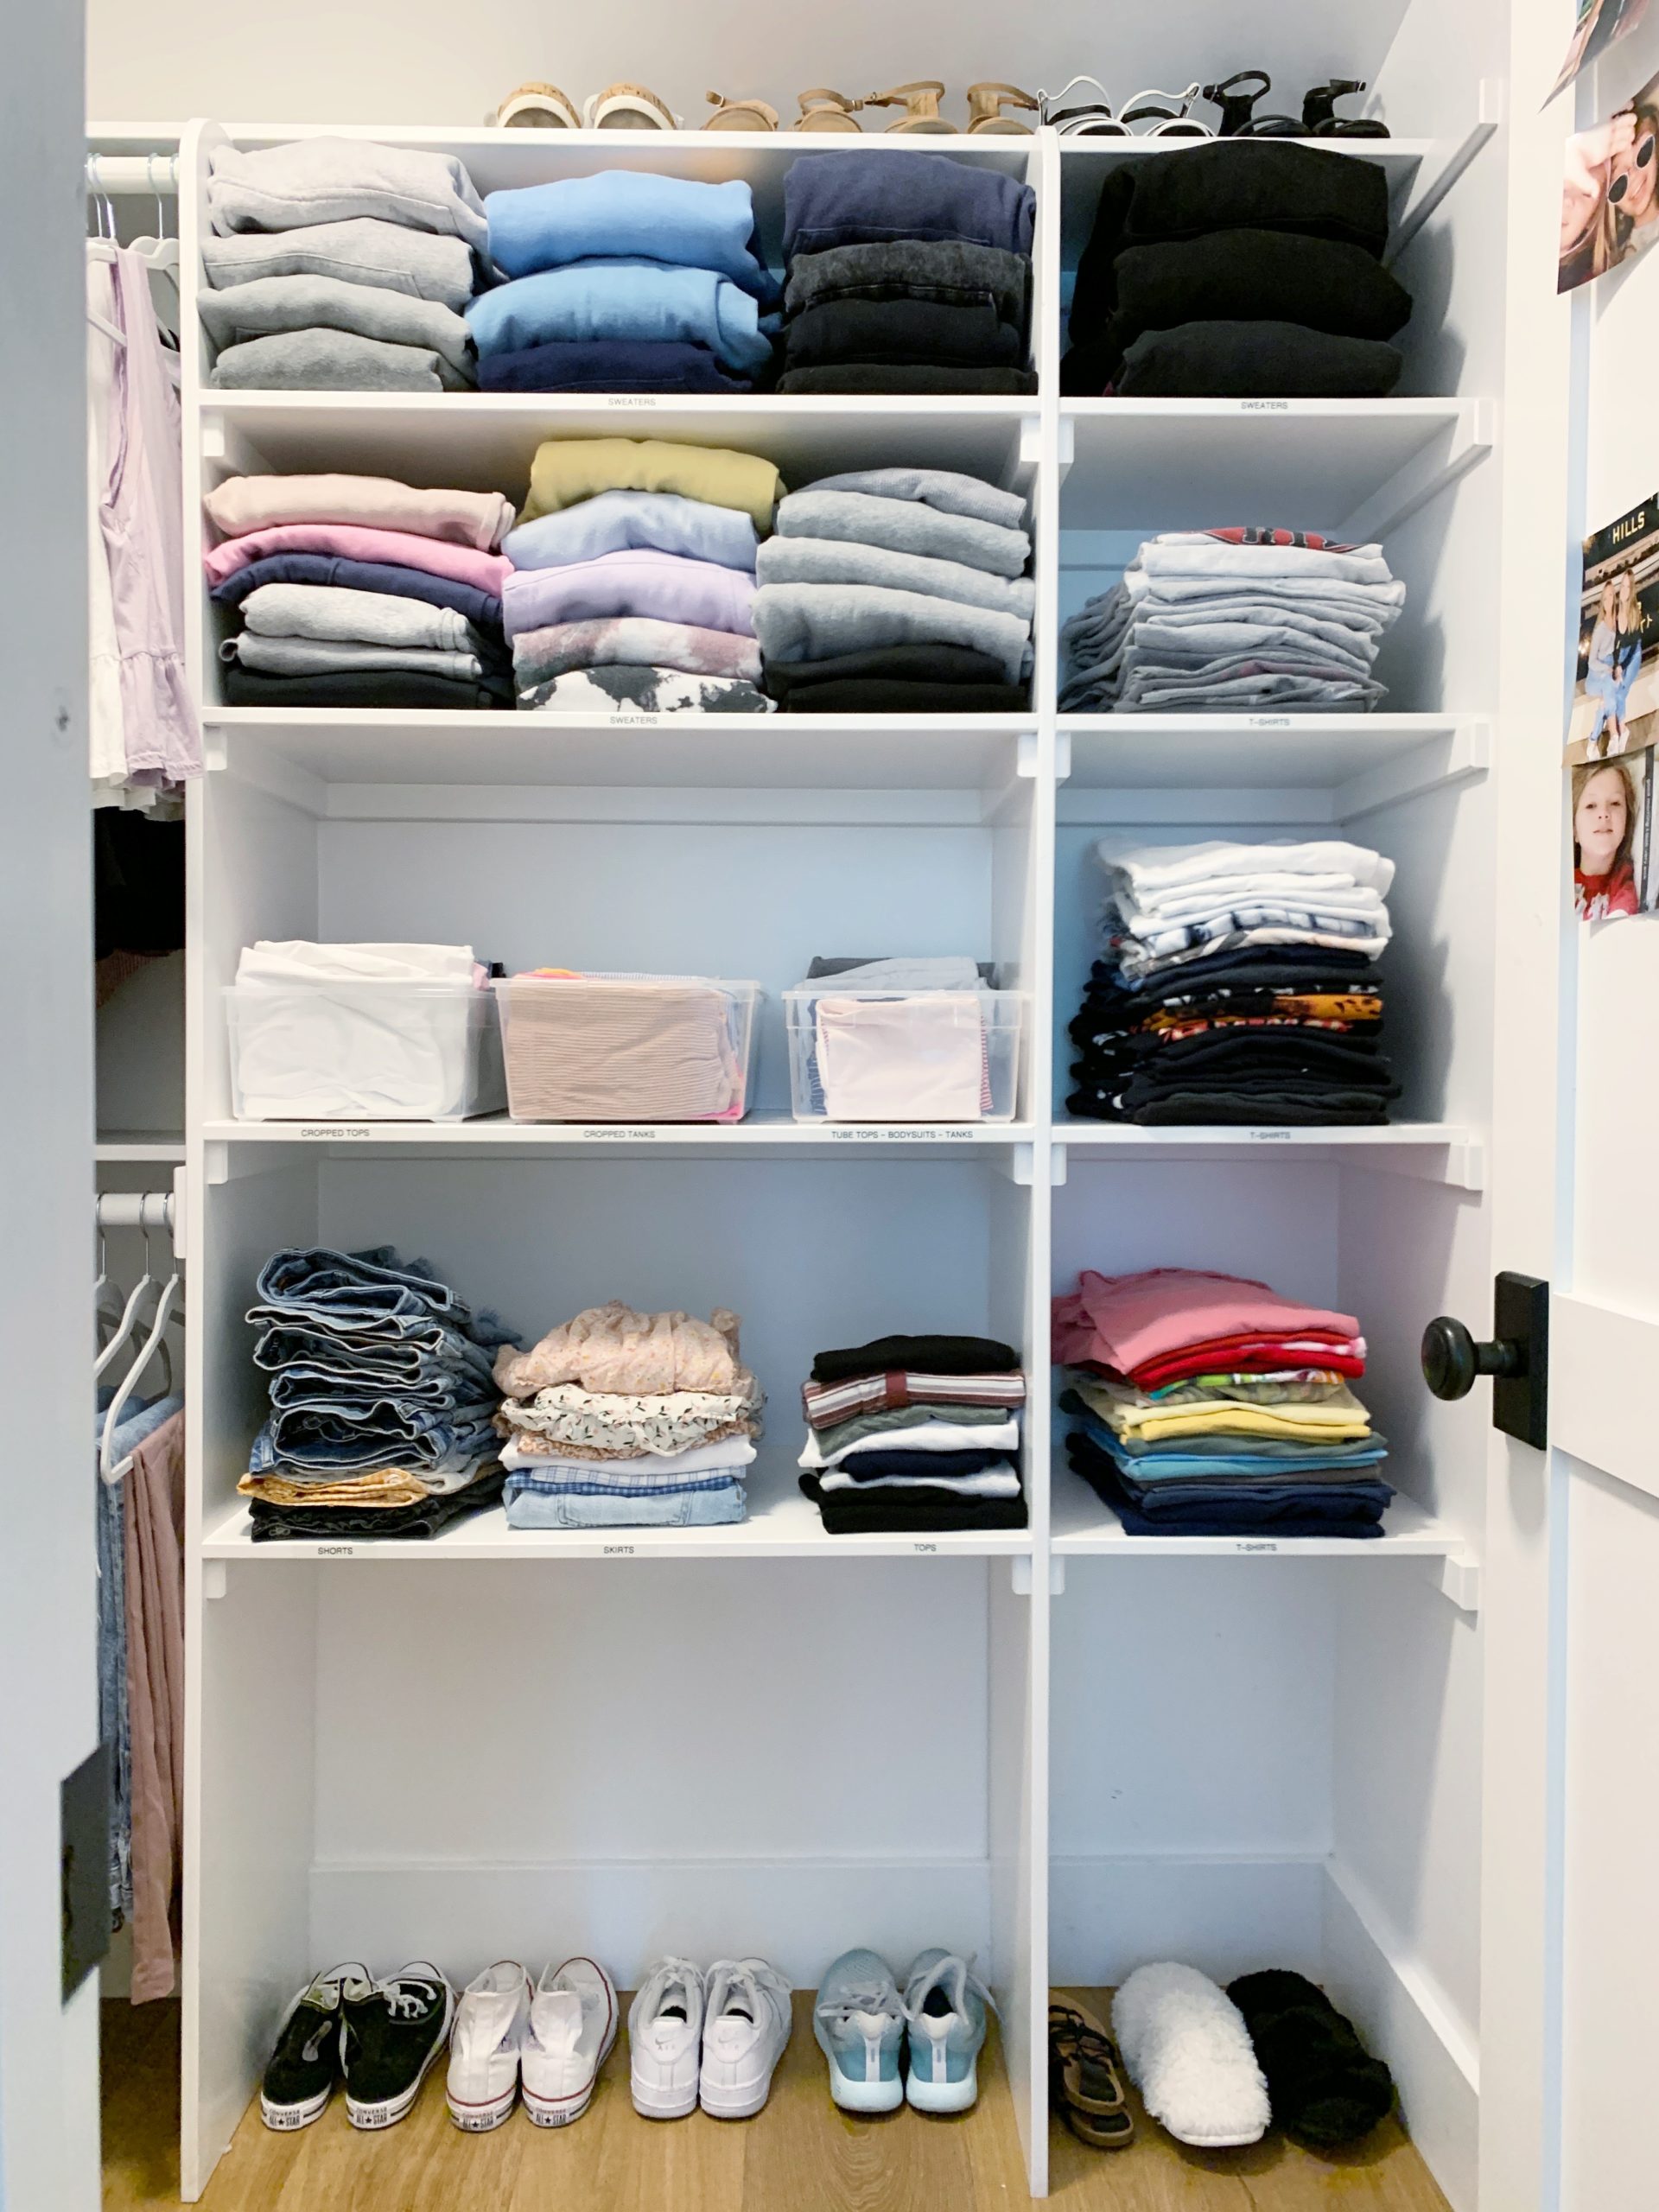 How to organize a teen closet. Professional organizer, Samantha Pregenzer, added a drawer set and space planned this small walk-in closet for total efficiency!